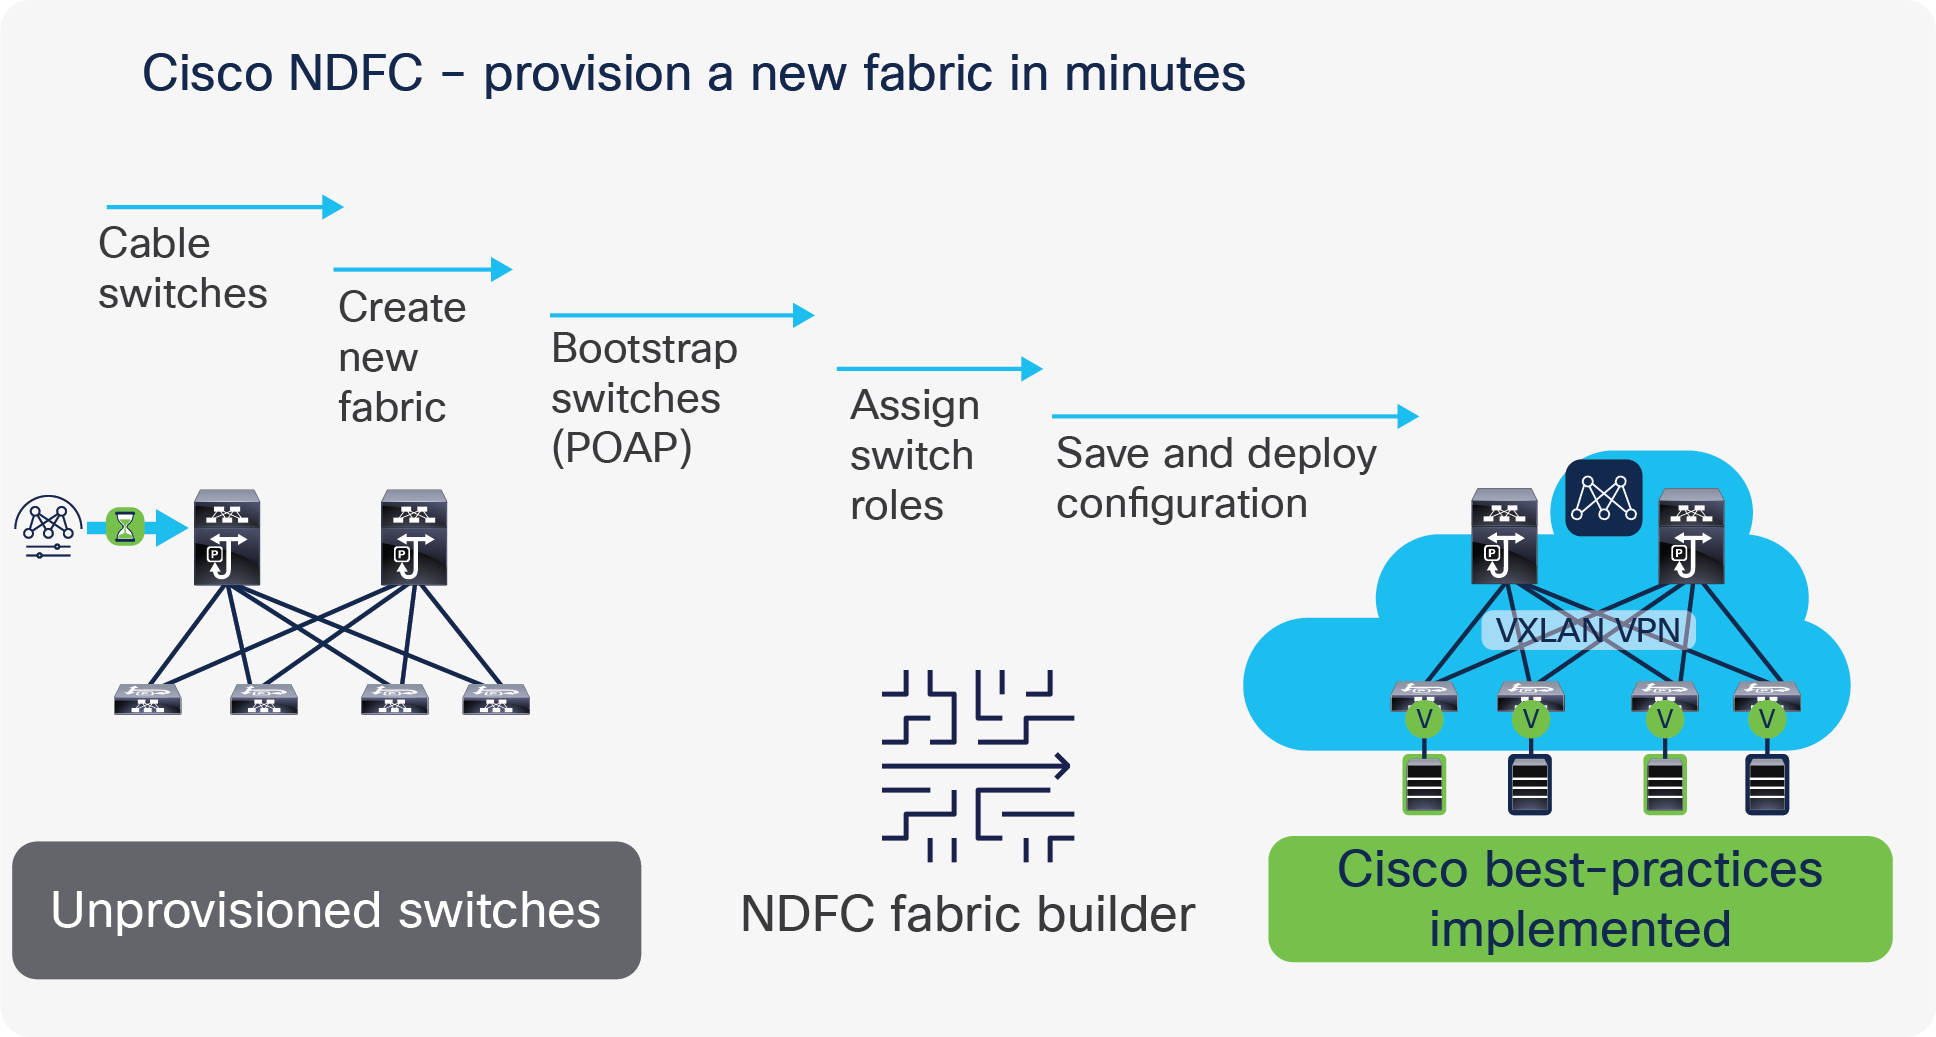 Provision a new fabric in minutes, with NDFC